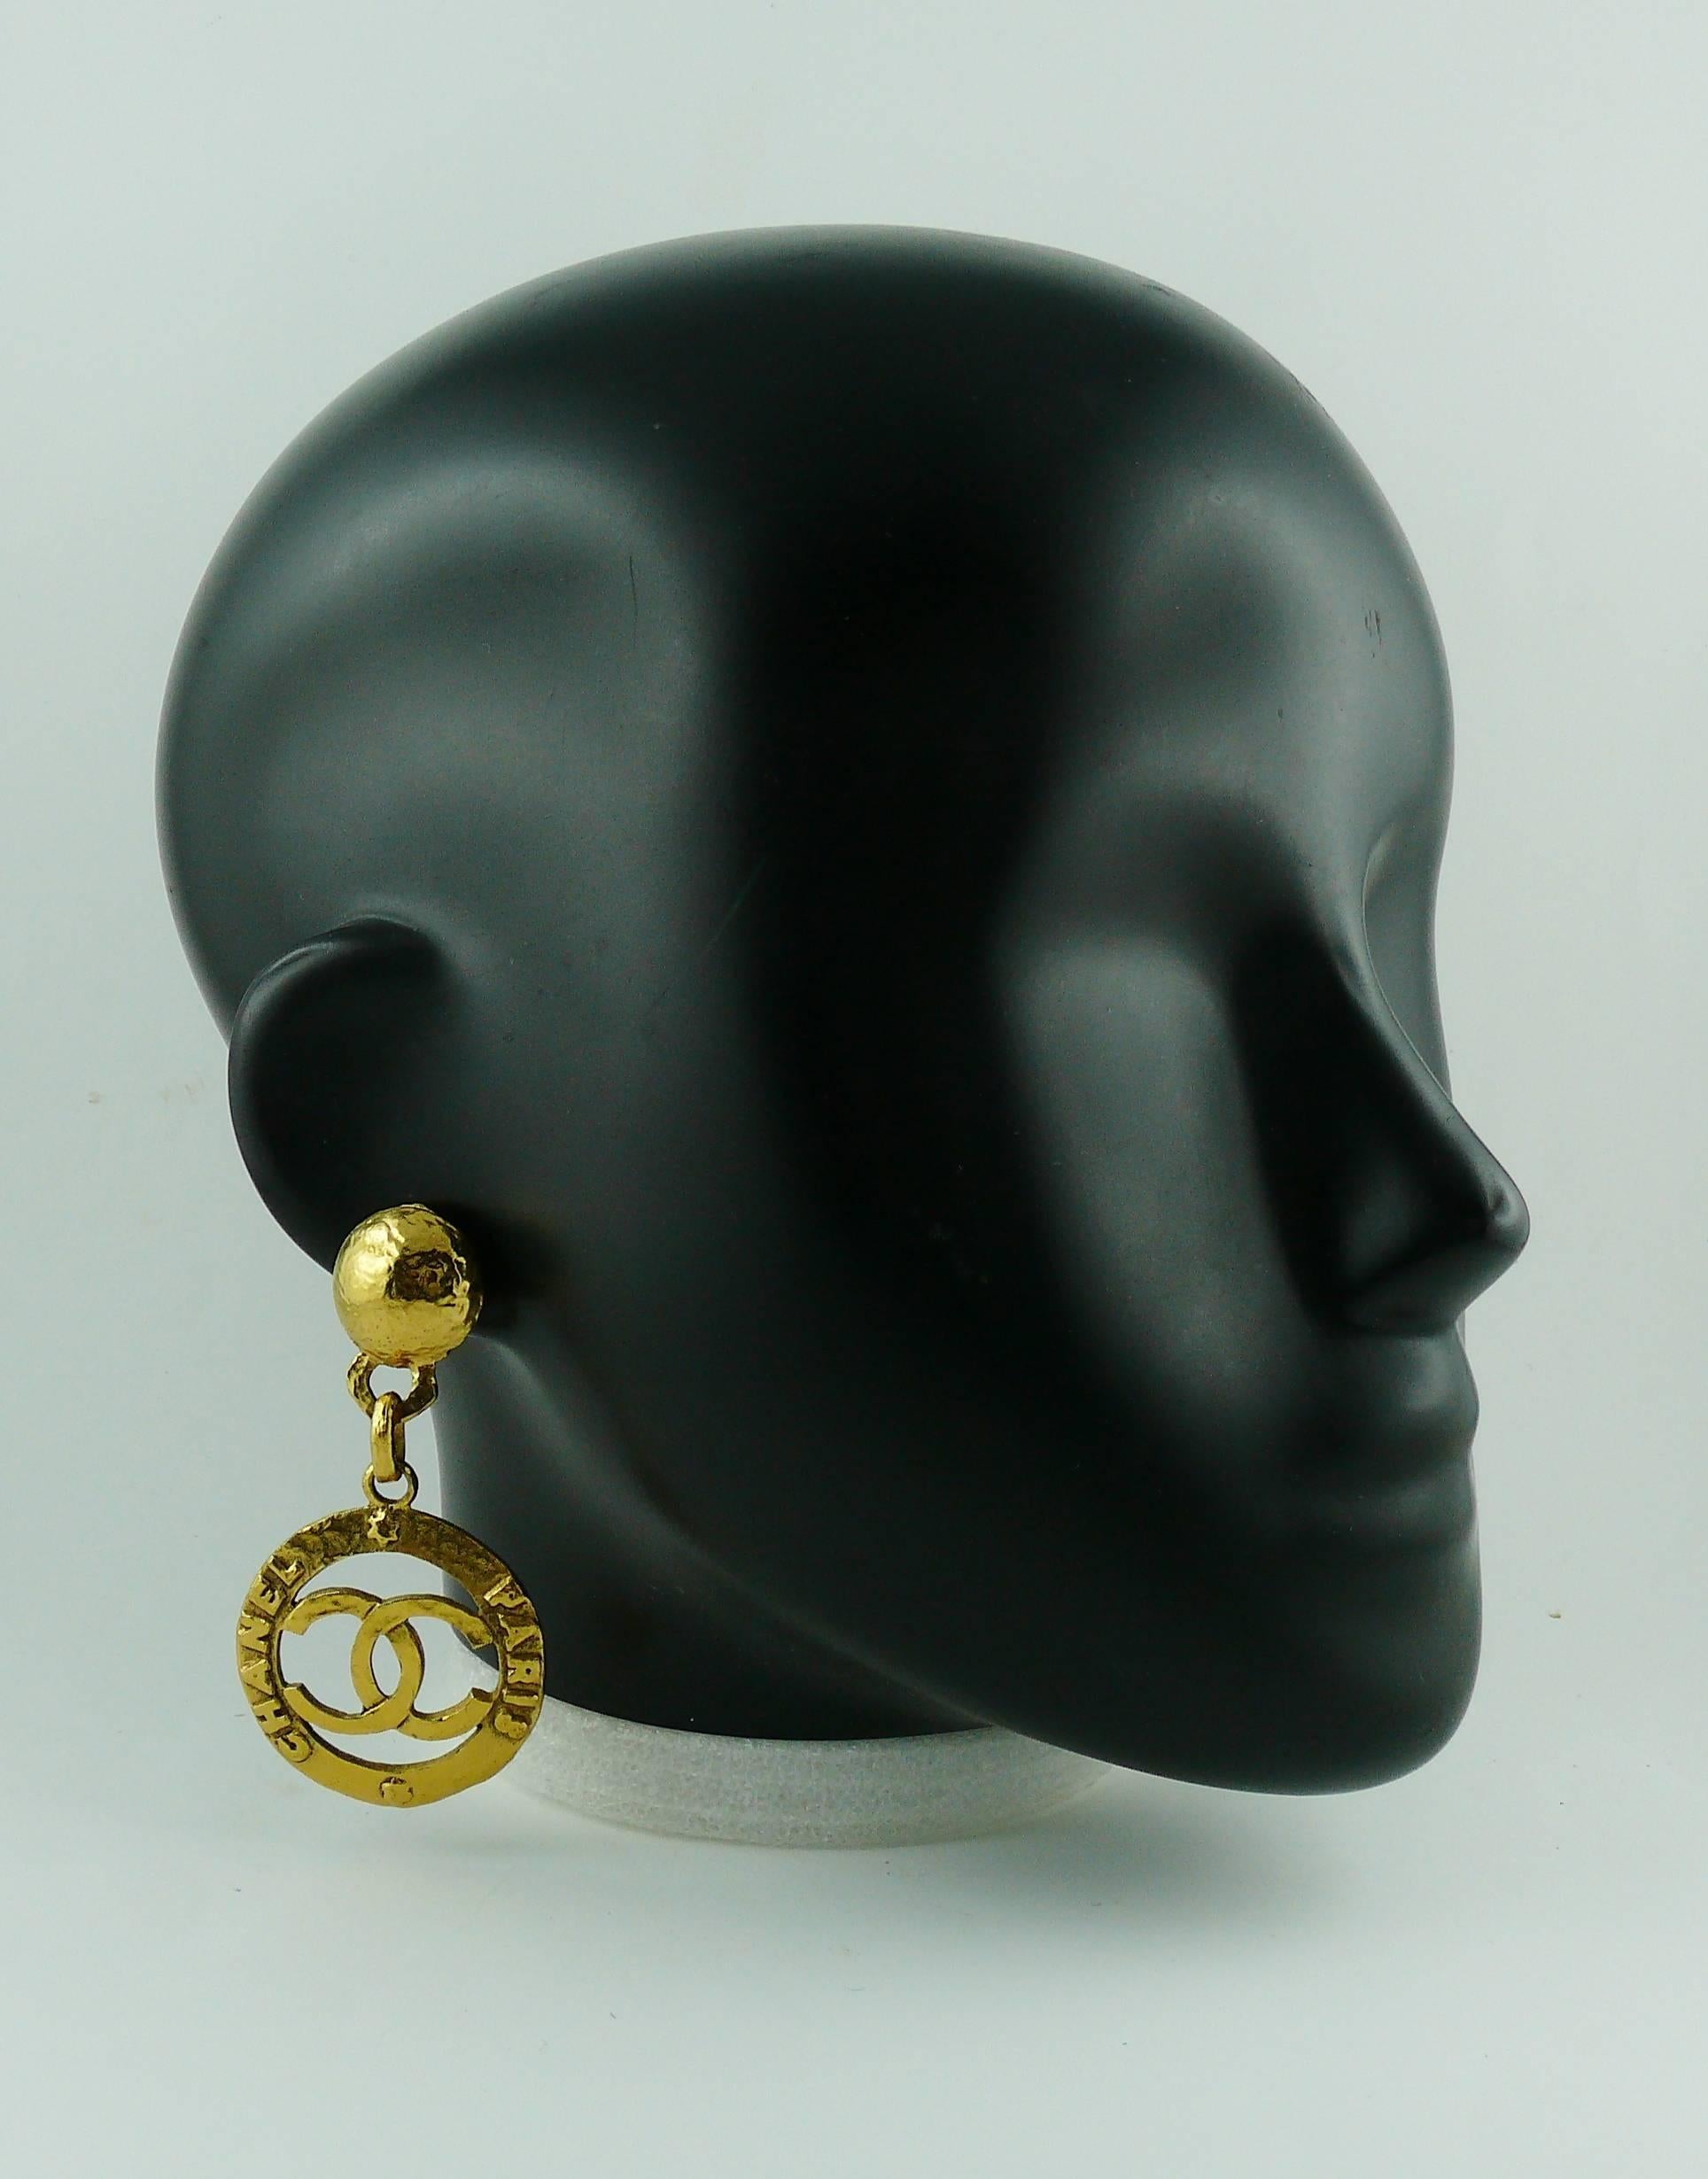 CHANEL vintage 1993 gold toned dangling earrings (clip-on) featuring a large CC monogram and 